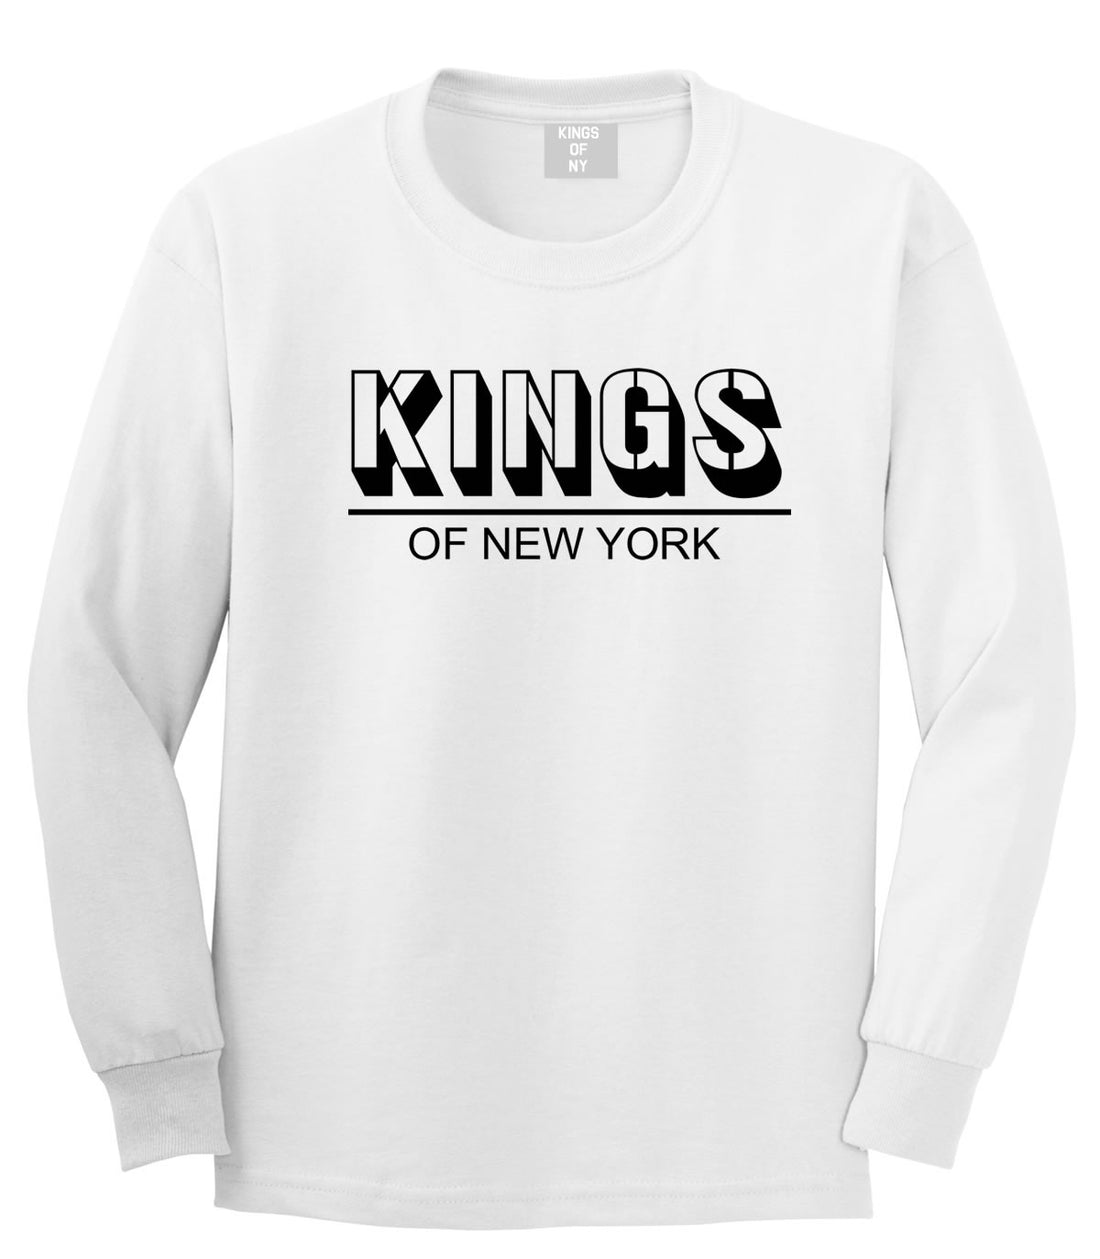 King Branded Block Letters Long Sleeve T-Shirt in White by Kings Of NY